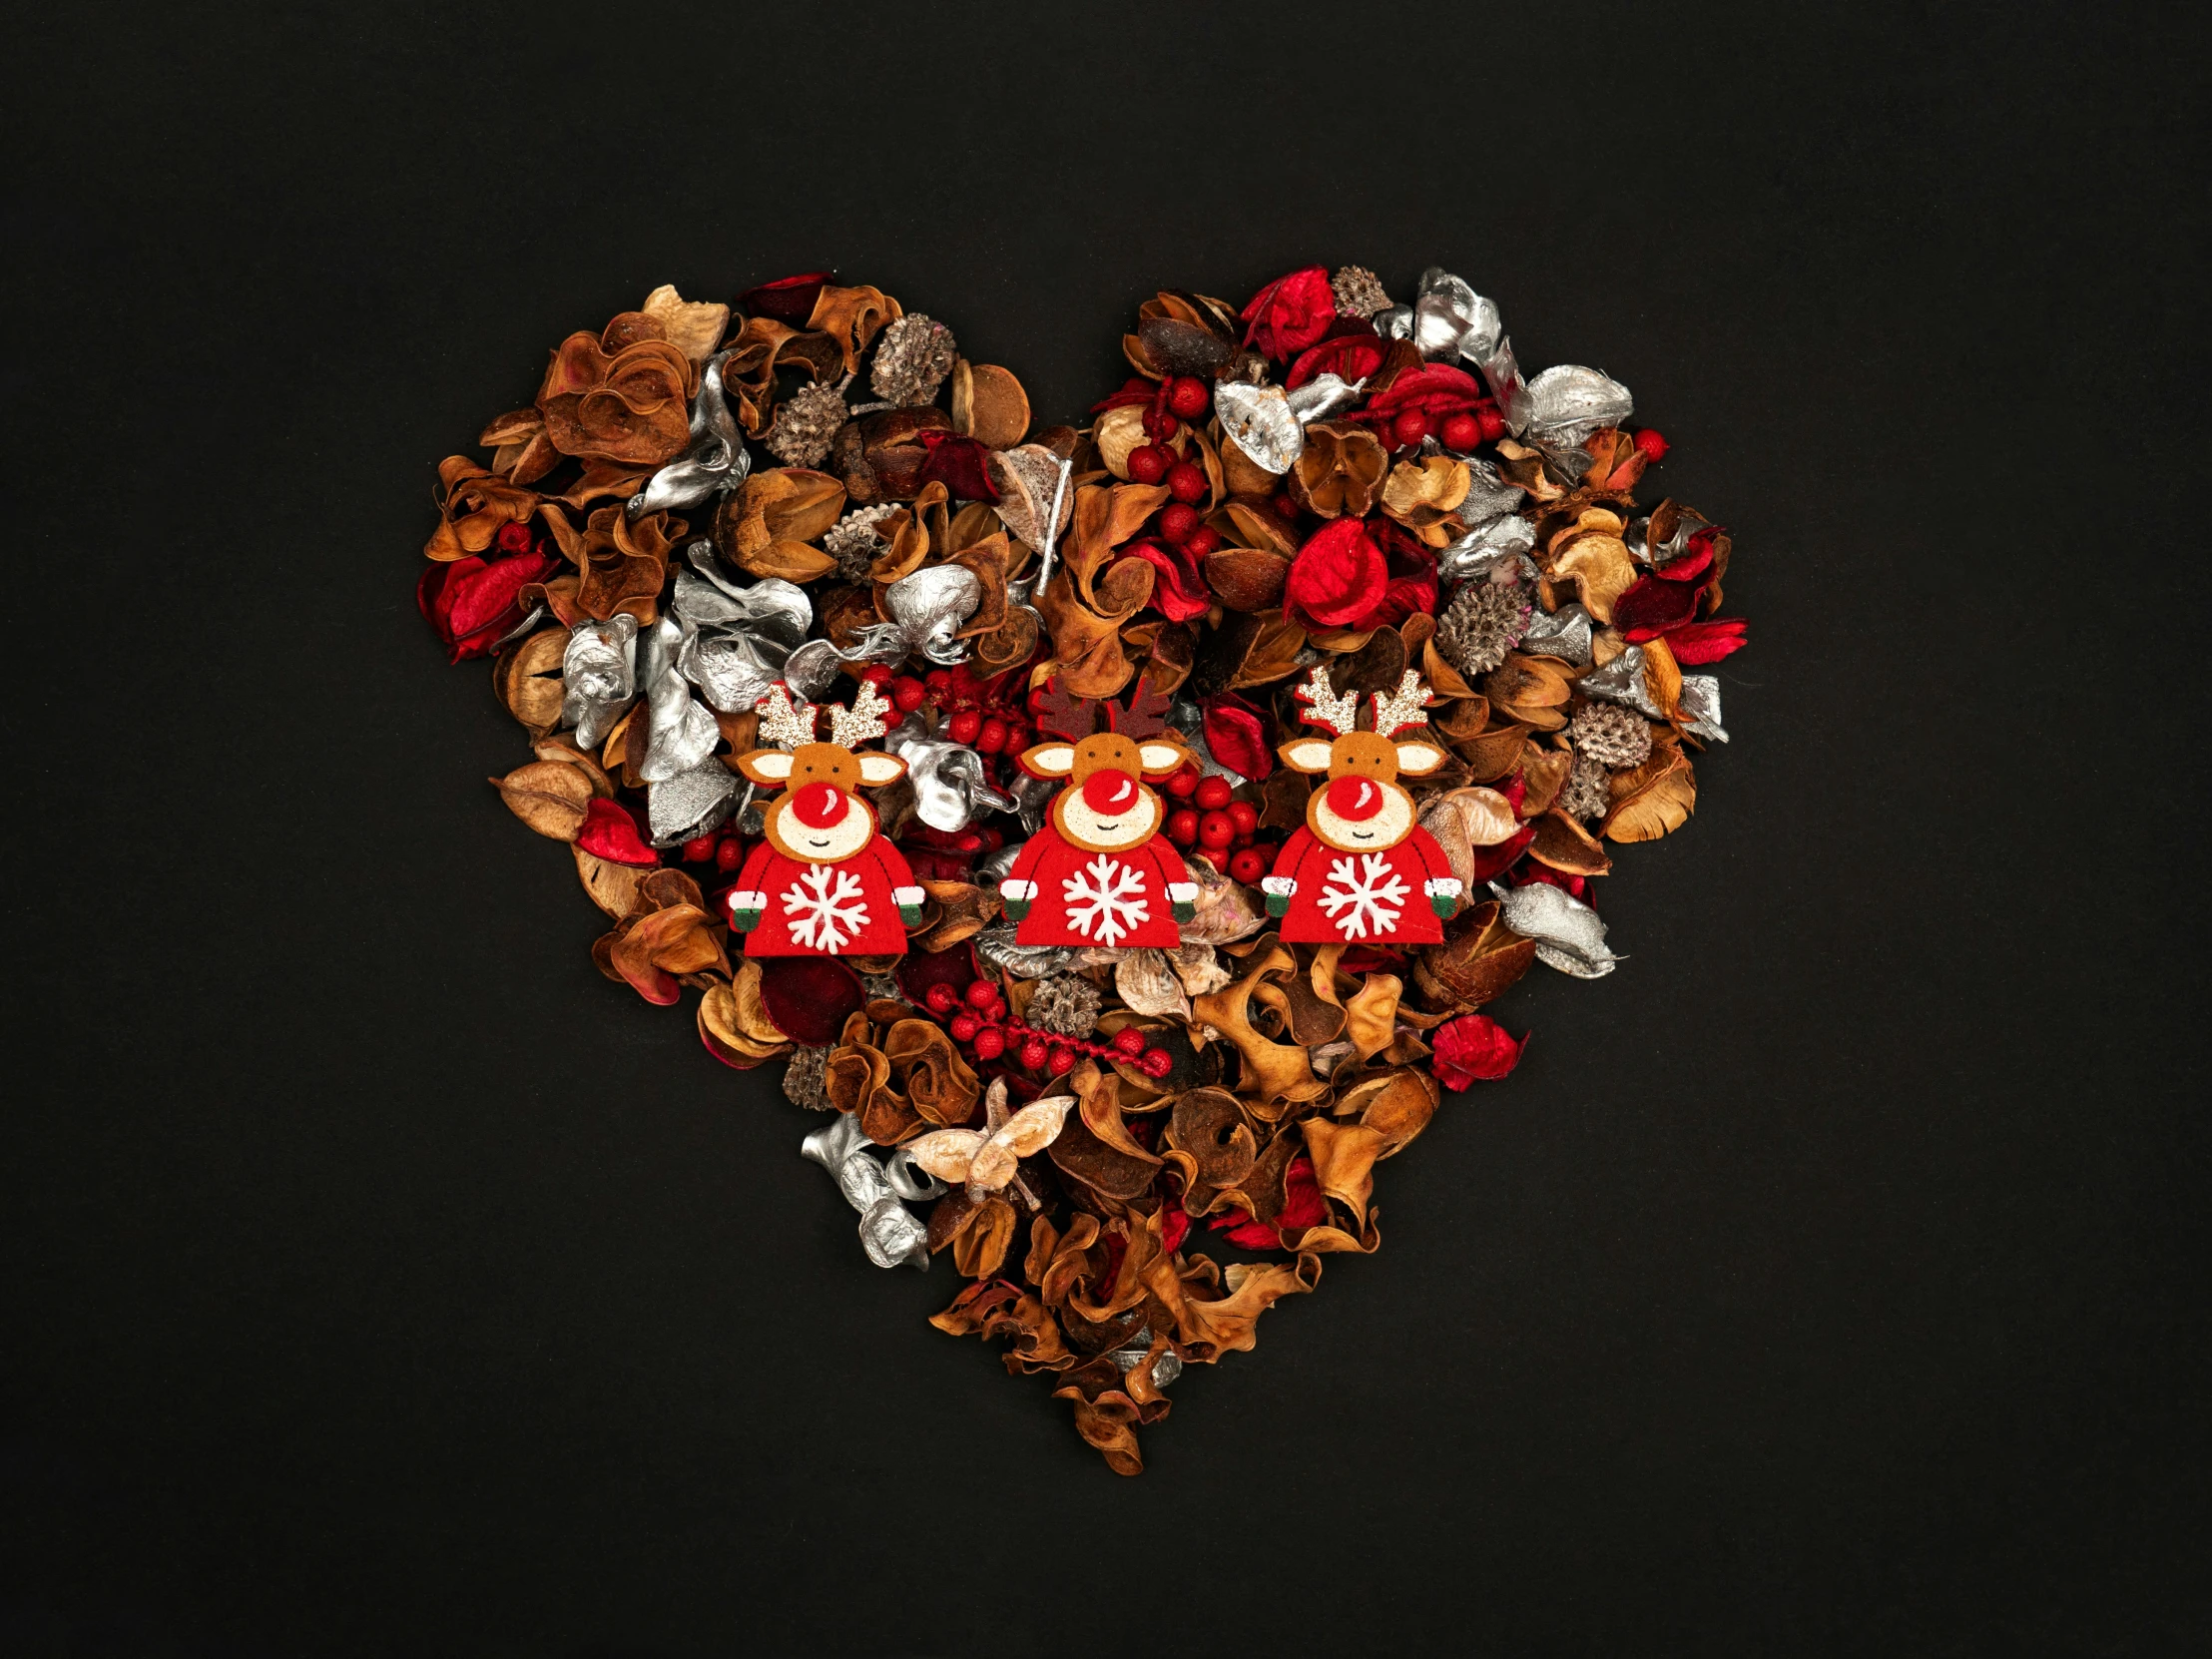 a heart - shaped composition of flowers and other holiday decorations